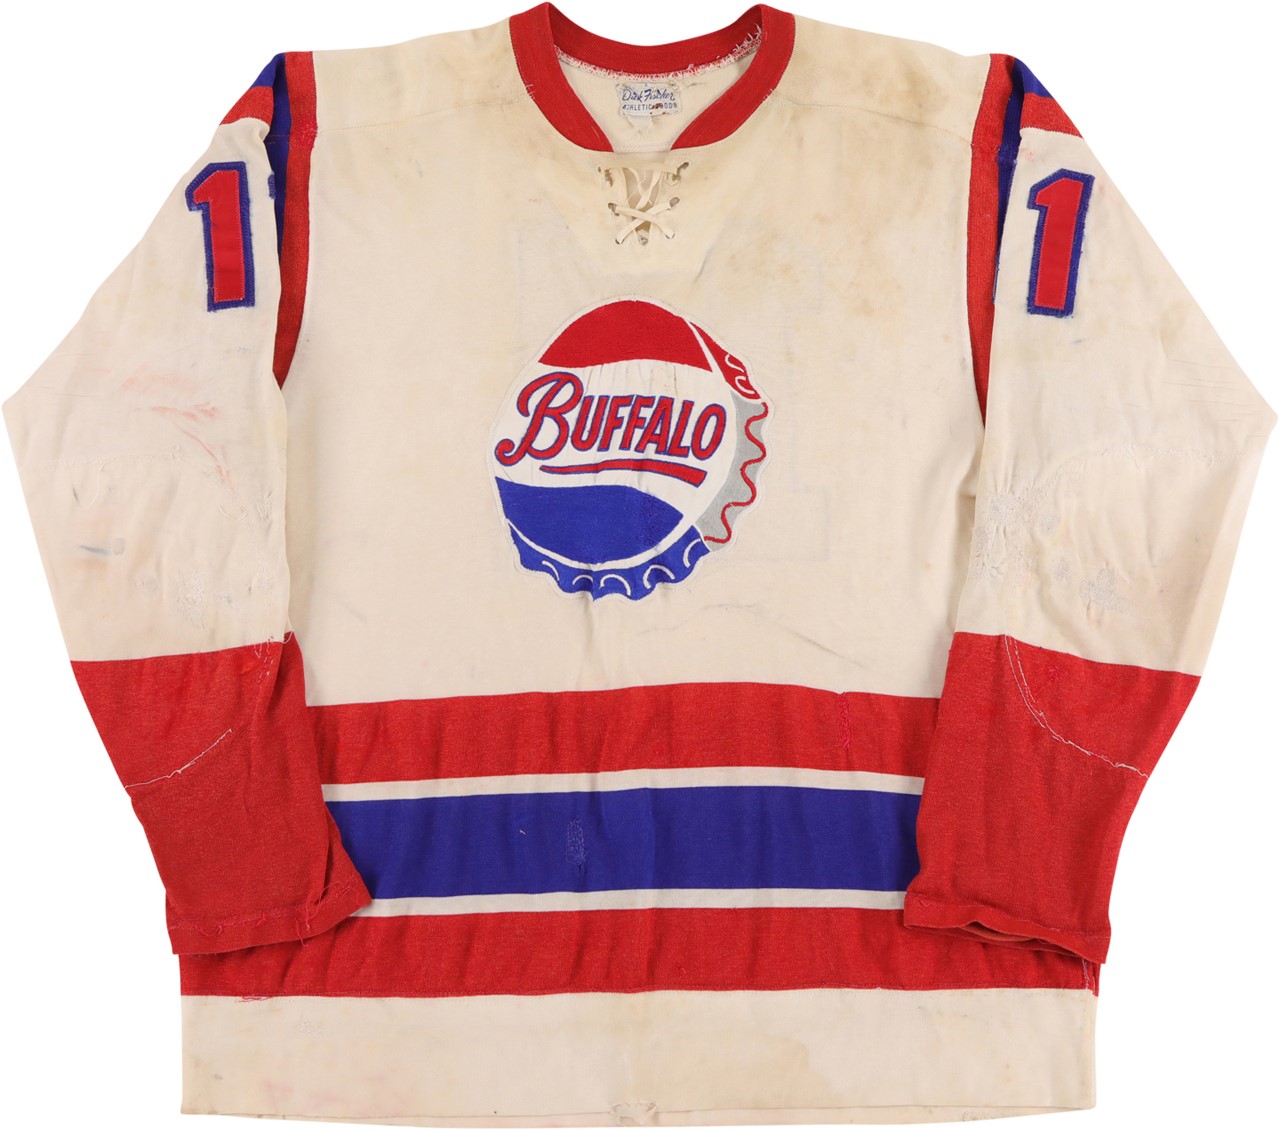 Buffalo Sabres Collection - 1960s Buffalo Bisons "Pepsi" Game Worn Jersey - Gil Perreault's Number 11!